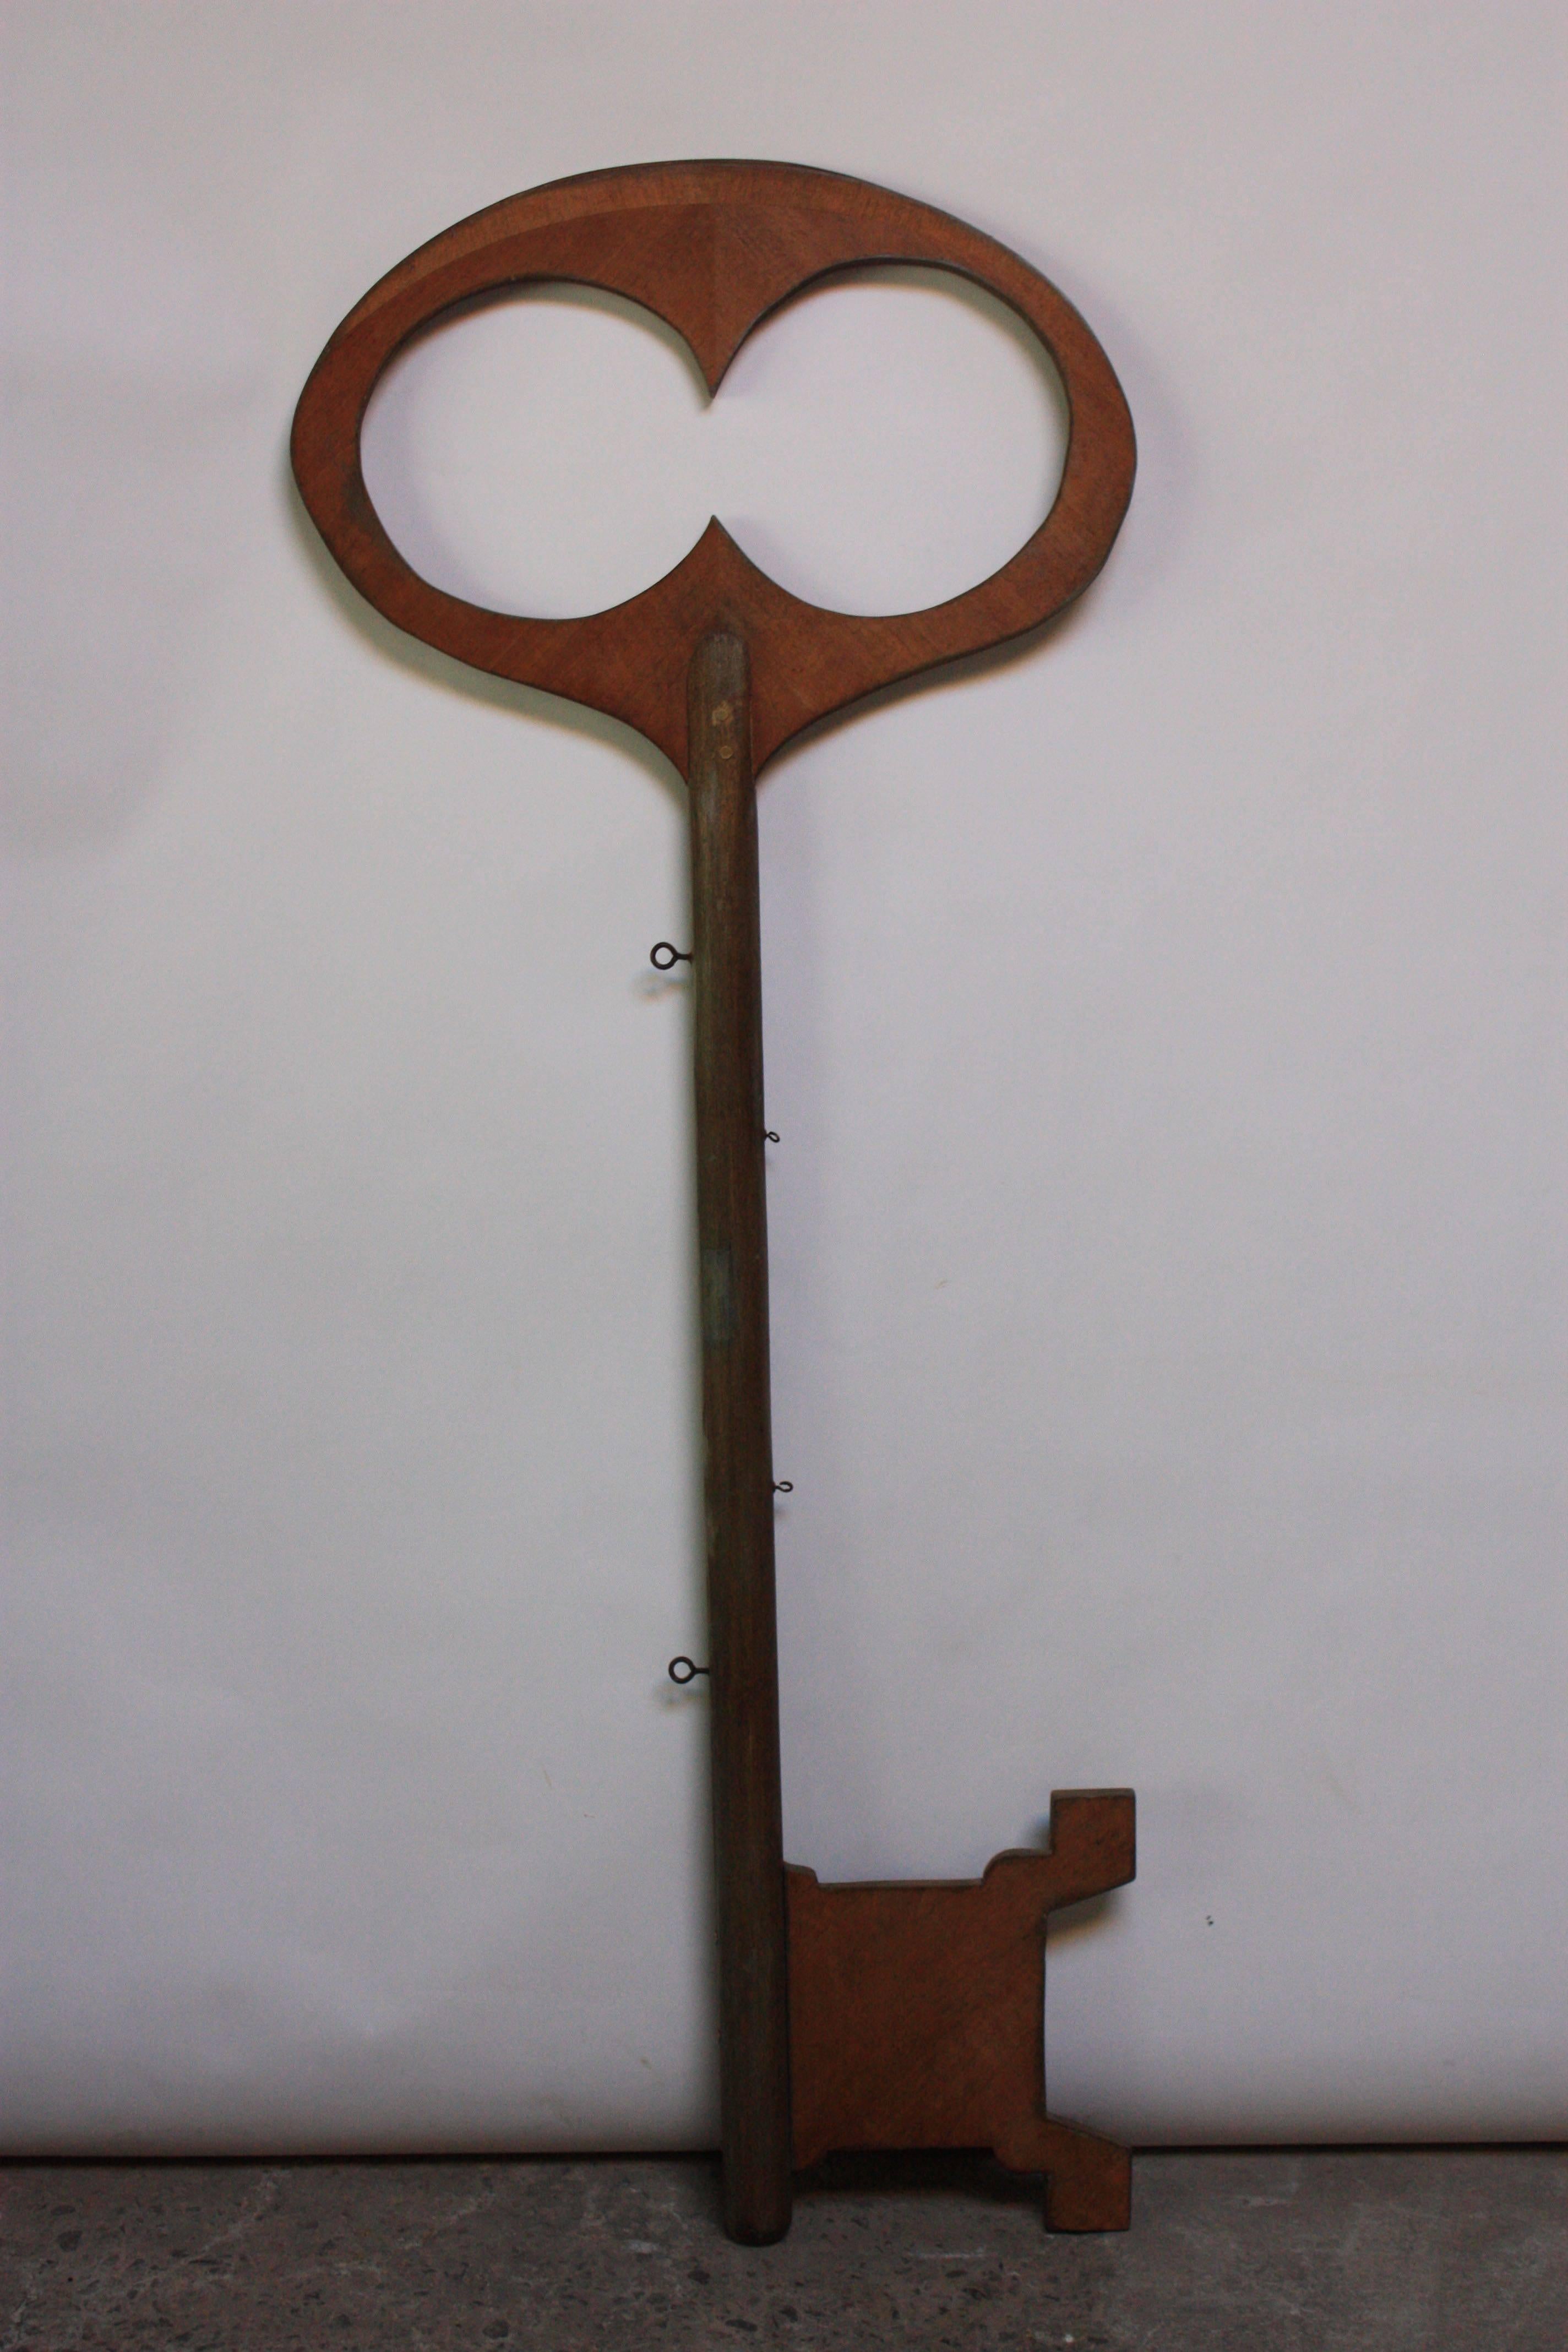 This 1960s large Folk Art key (70.5" L) was likely an advertising piece. It was made for display purposes and wood have been suspended in front of a retail location.